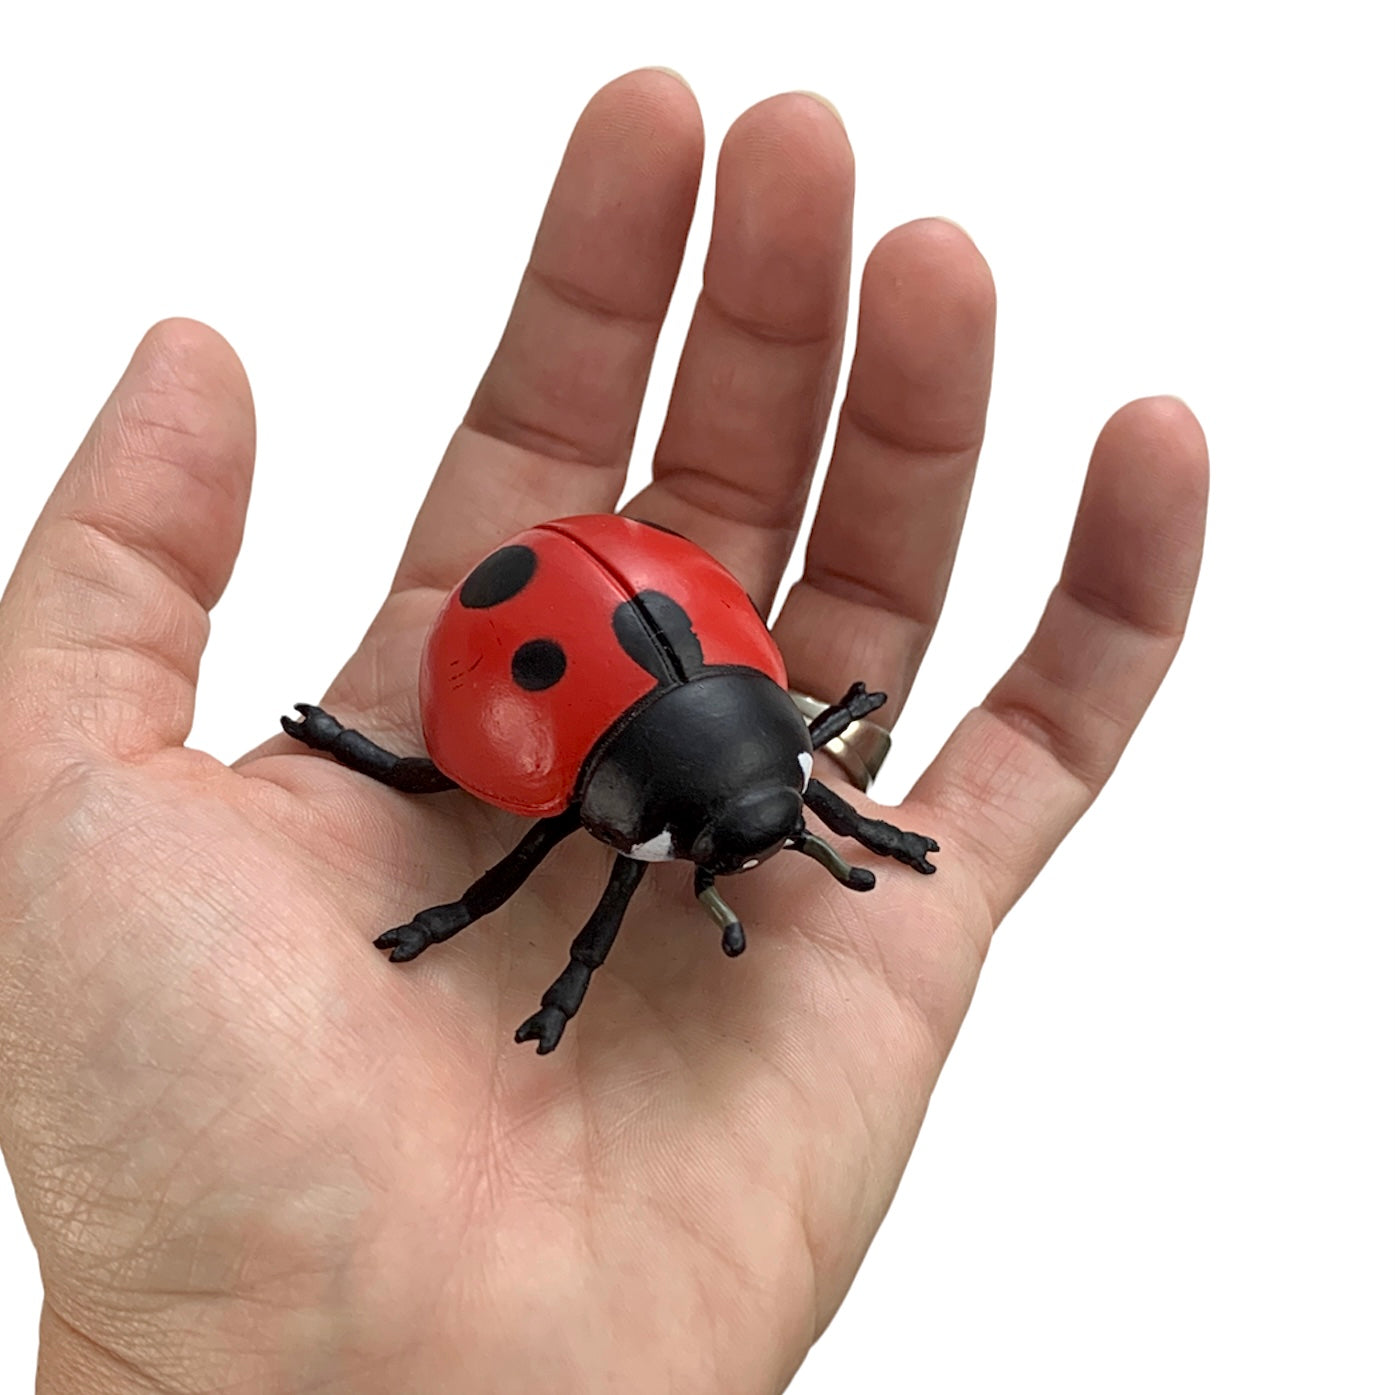 LadyBug Life Cycle (with 3D models)